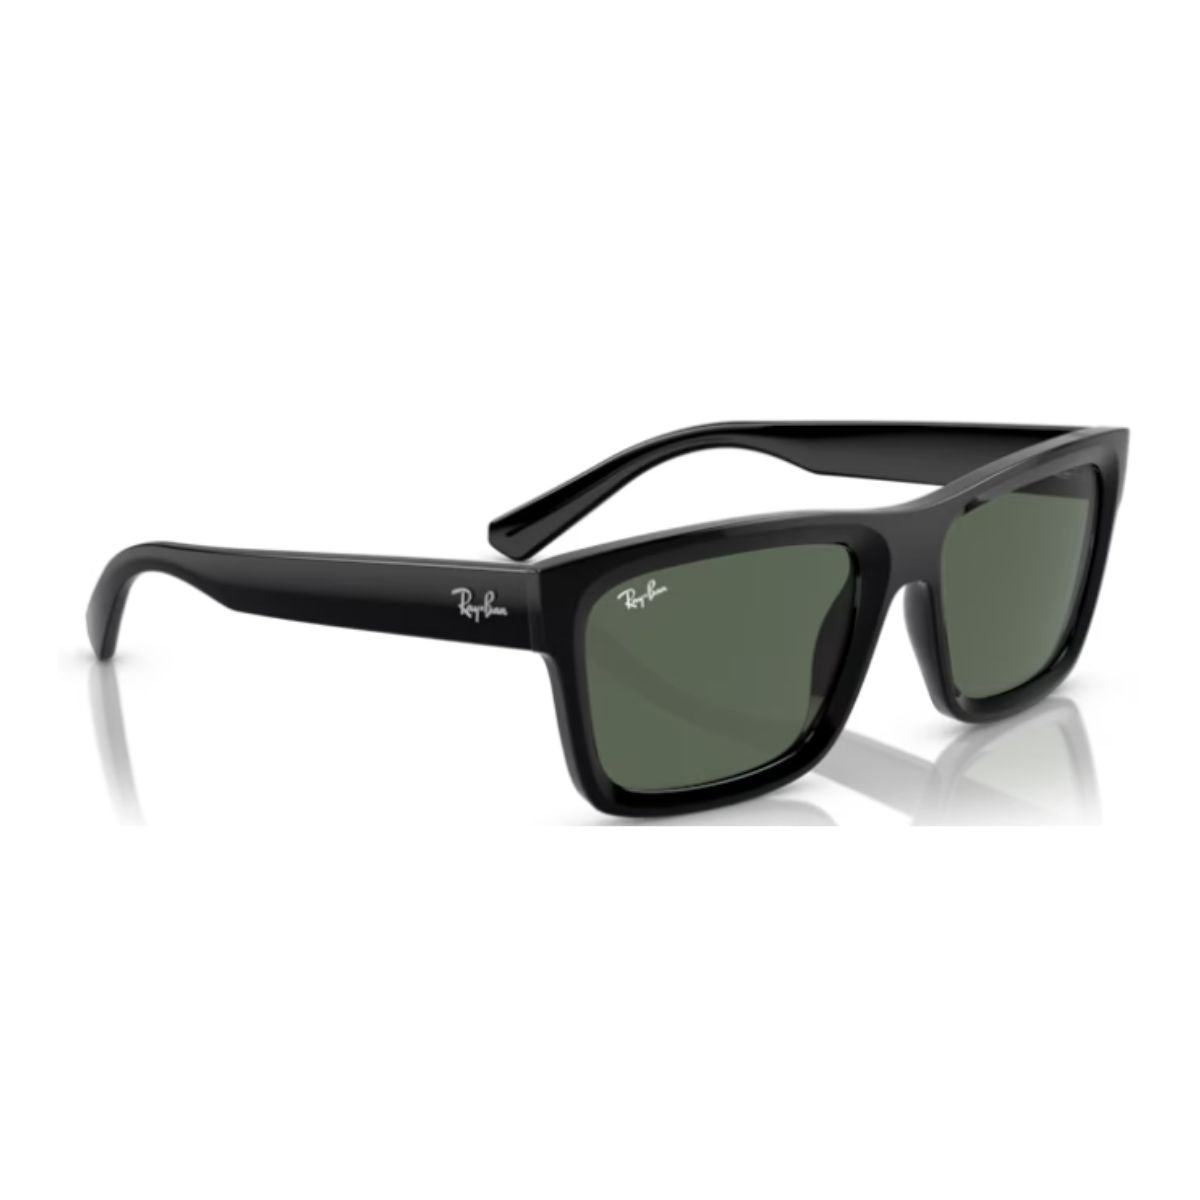 "Best Ray Ban 4396 6677/71 UV protected Square Sunglass For Men's At Optorium"